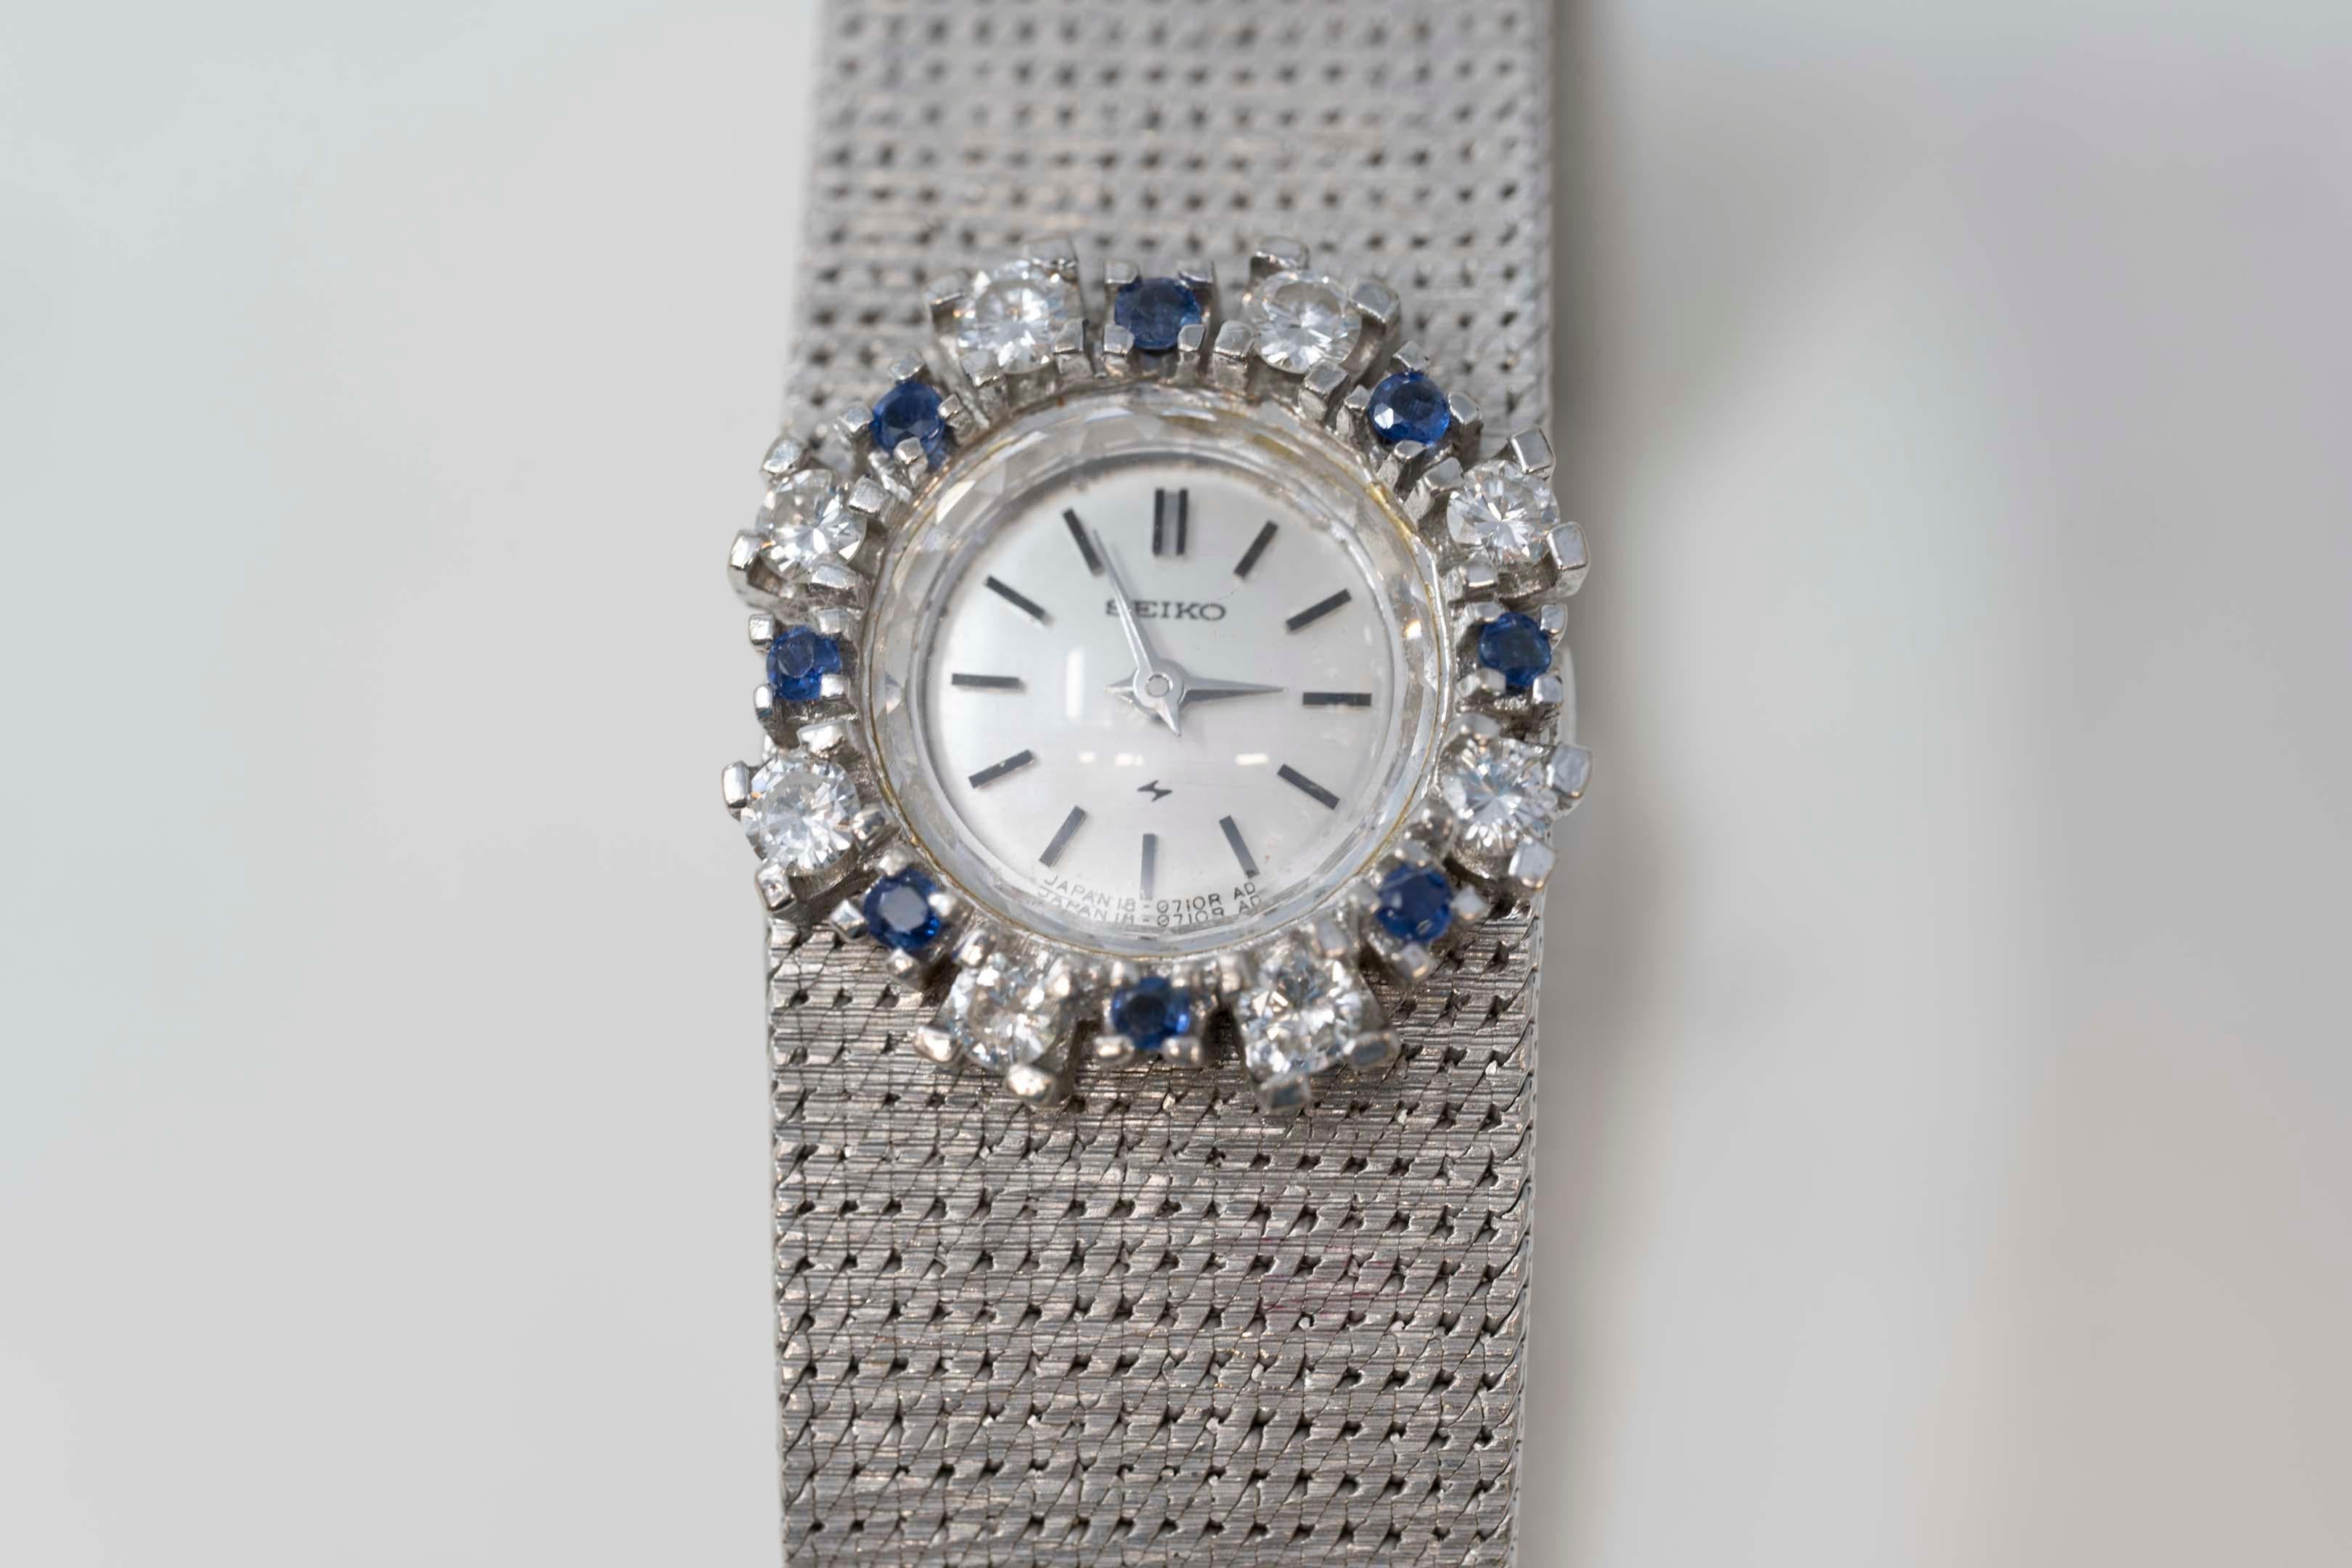 Vintage Seiko 14k white gold watch and bracelet, mechanical movement set with 8 diamonds full cut VS-VVS and G-H color for a total of .65ct. 8 Sapphire natural stones, case #2823, stamped 14k, measures 7 inches long. In good working order. Preowned,